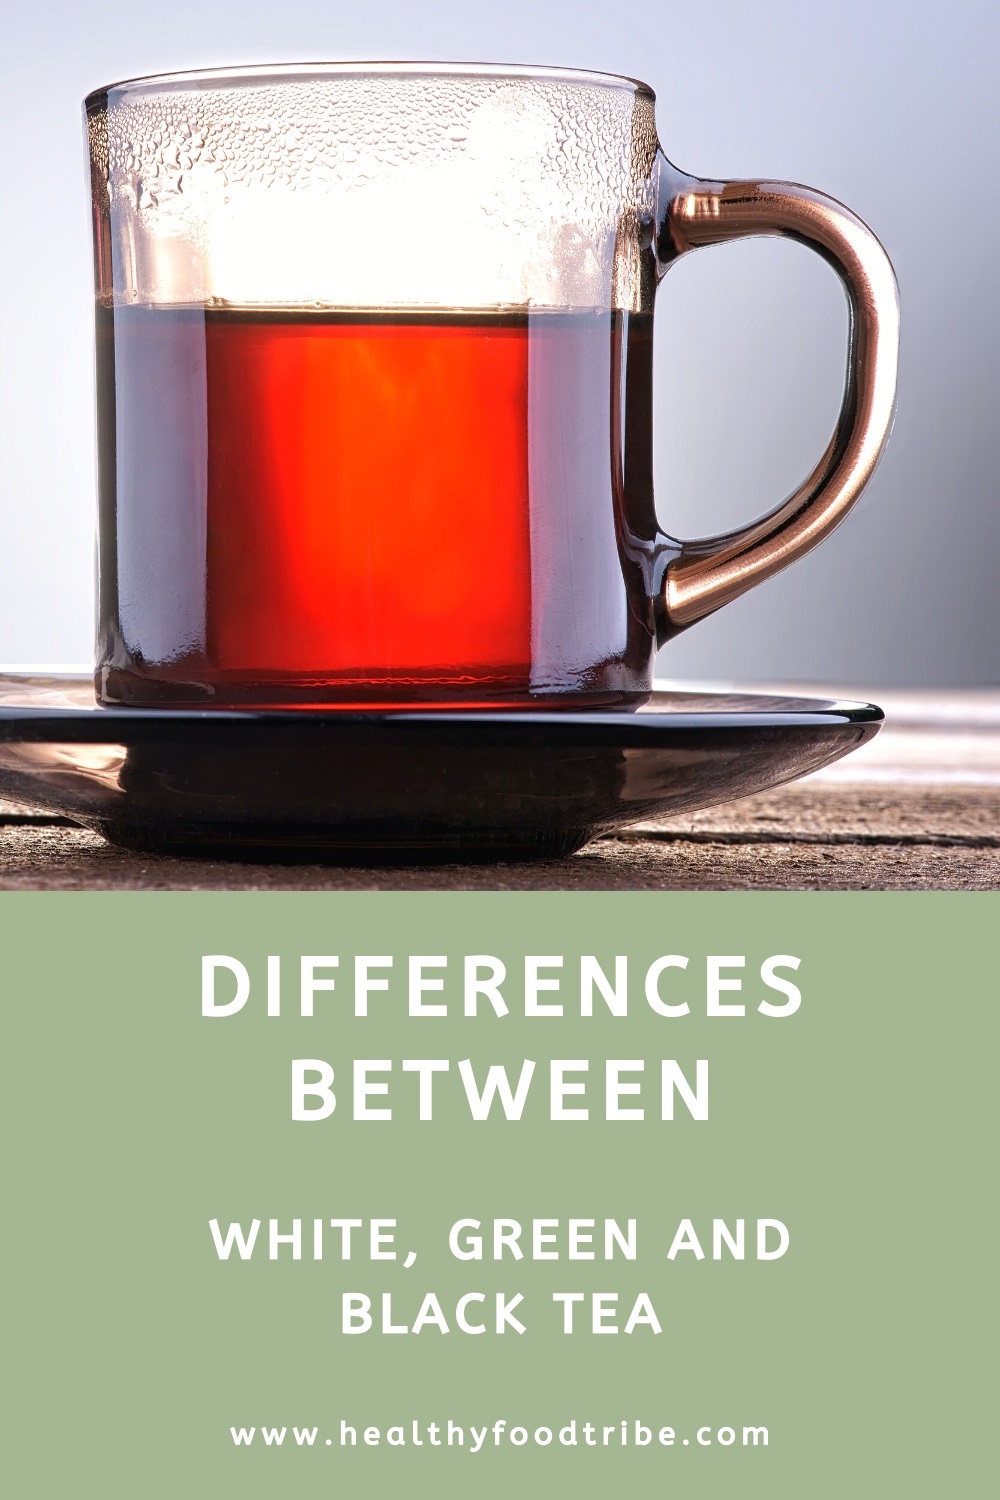 Differences between white, green and black tea